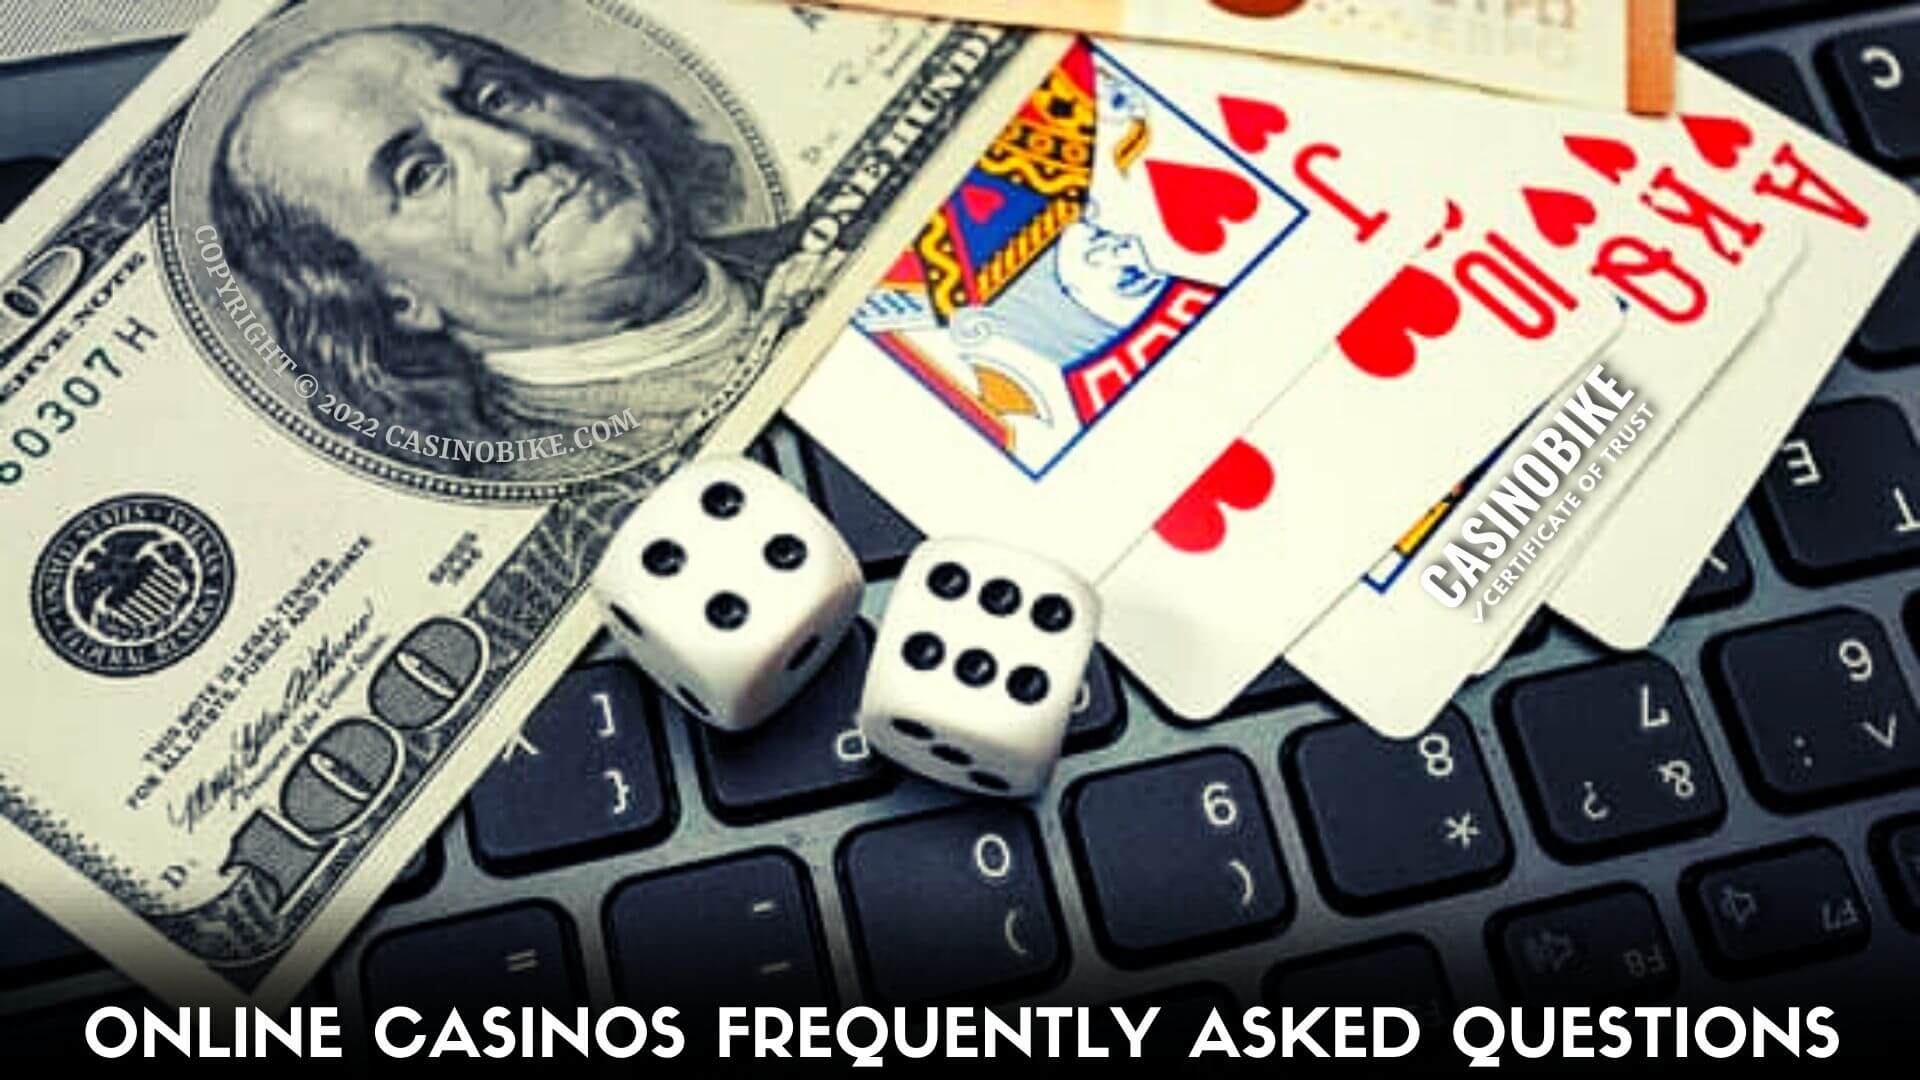 Online casinos frequently asked questions